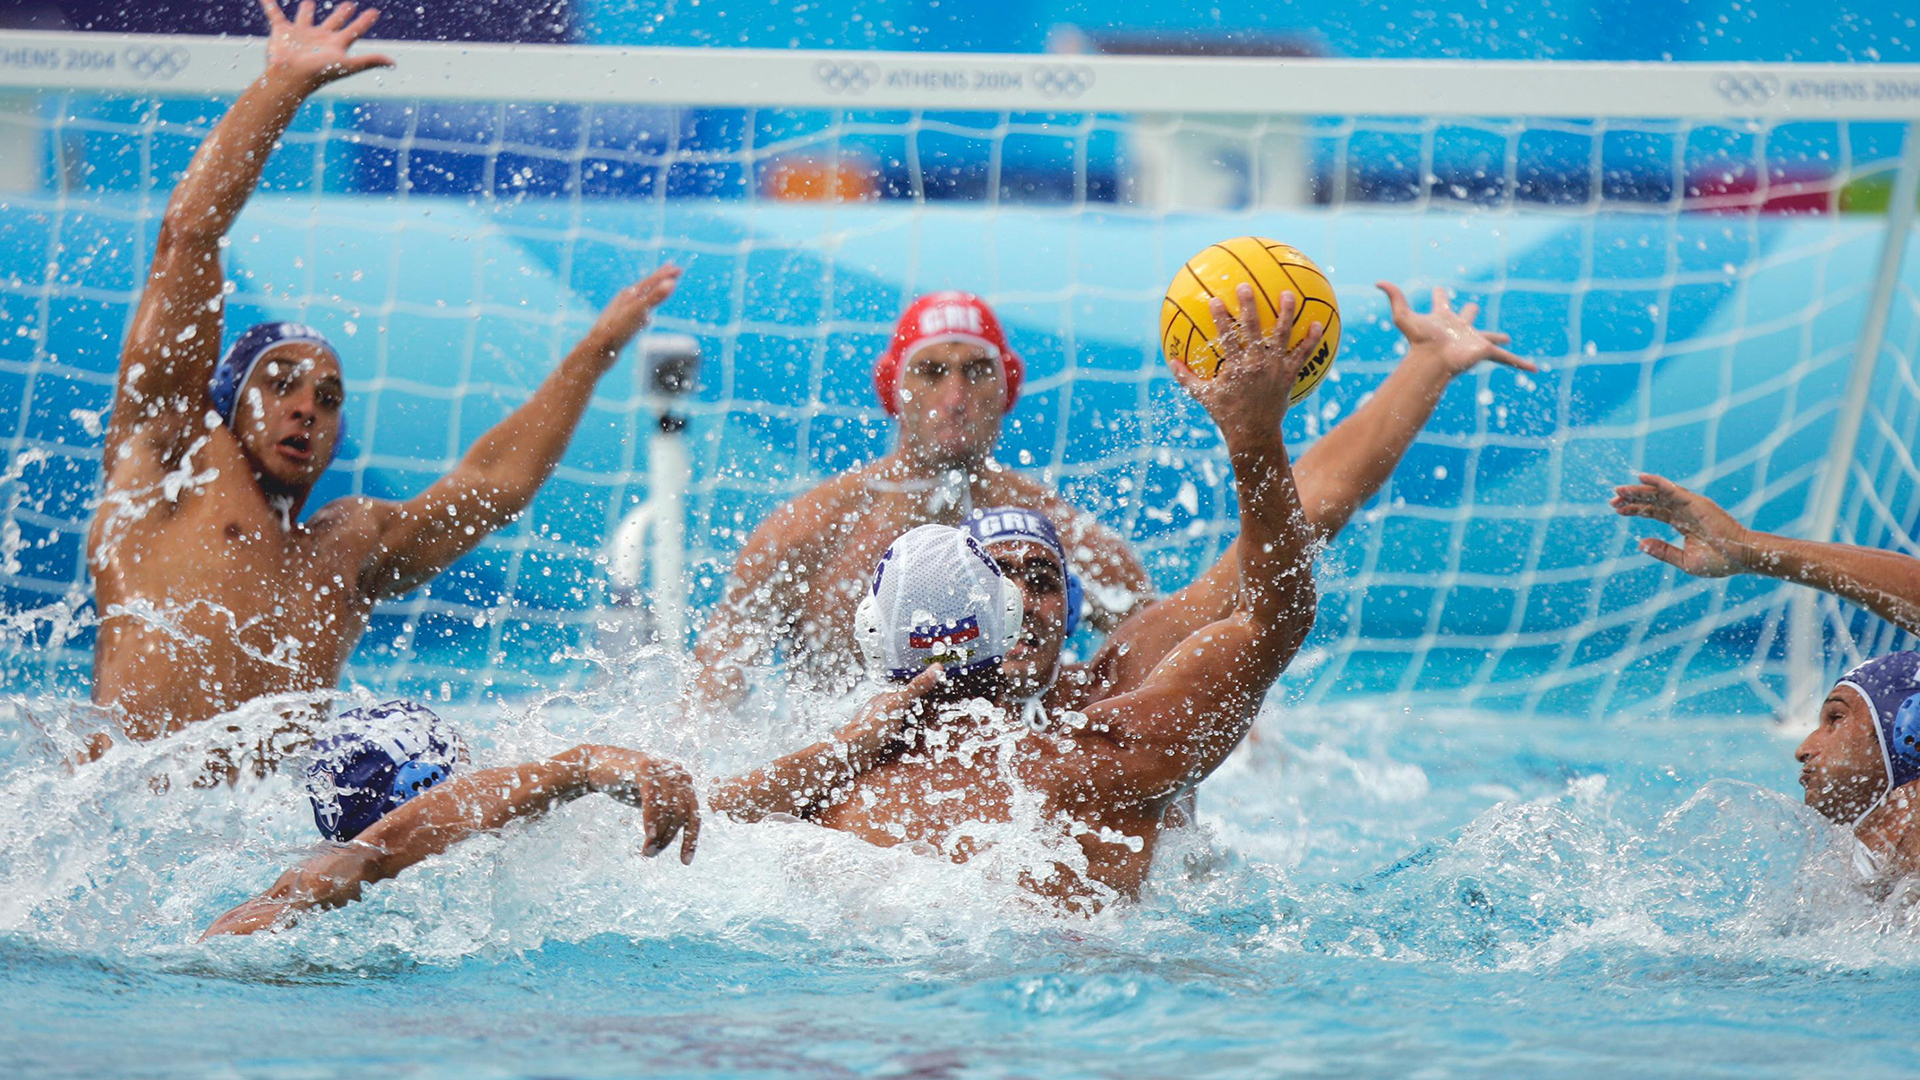 https://fittoplay.org/globalassets/pictures/water-polo/water-polo-action-16-9.jpg